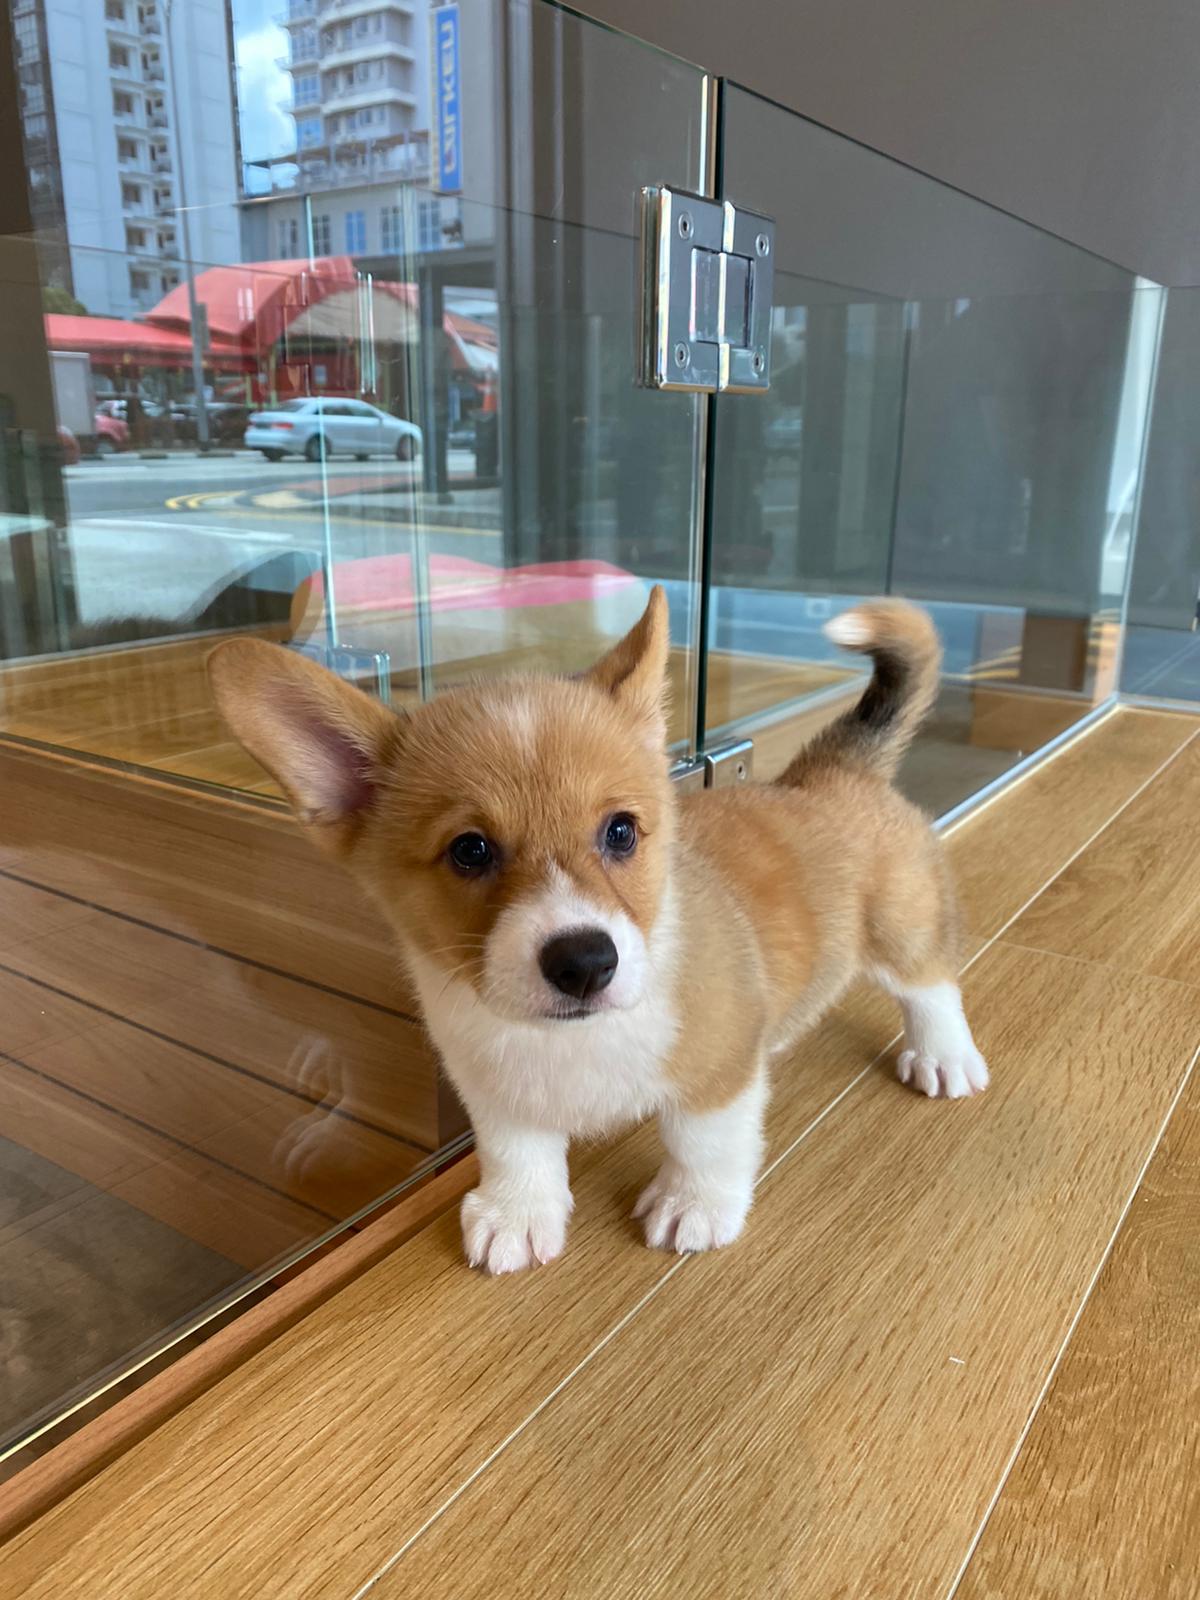 Best Quality Corgi Puppies for Sale In Singapore (July 2020)